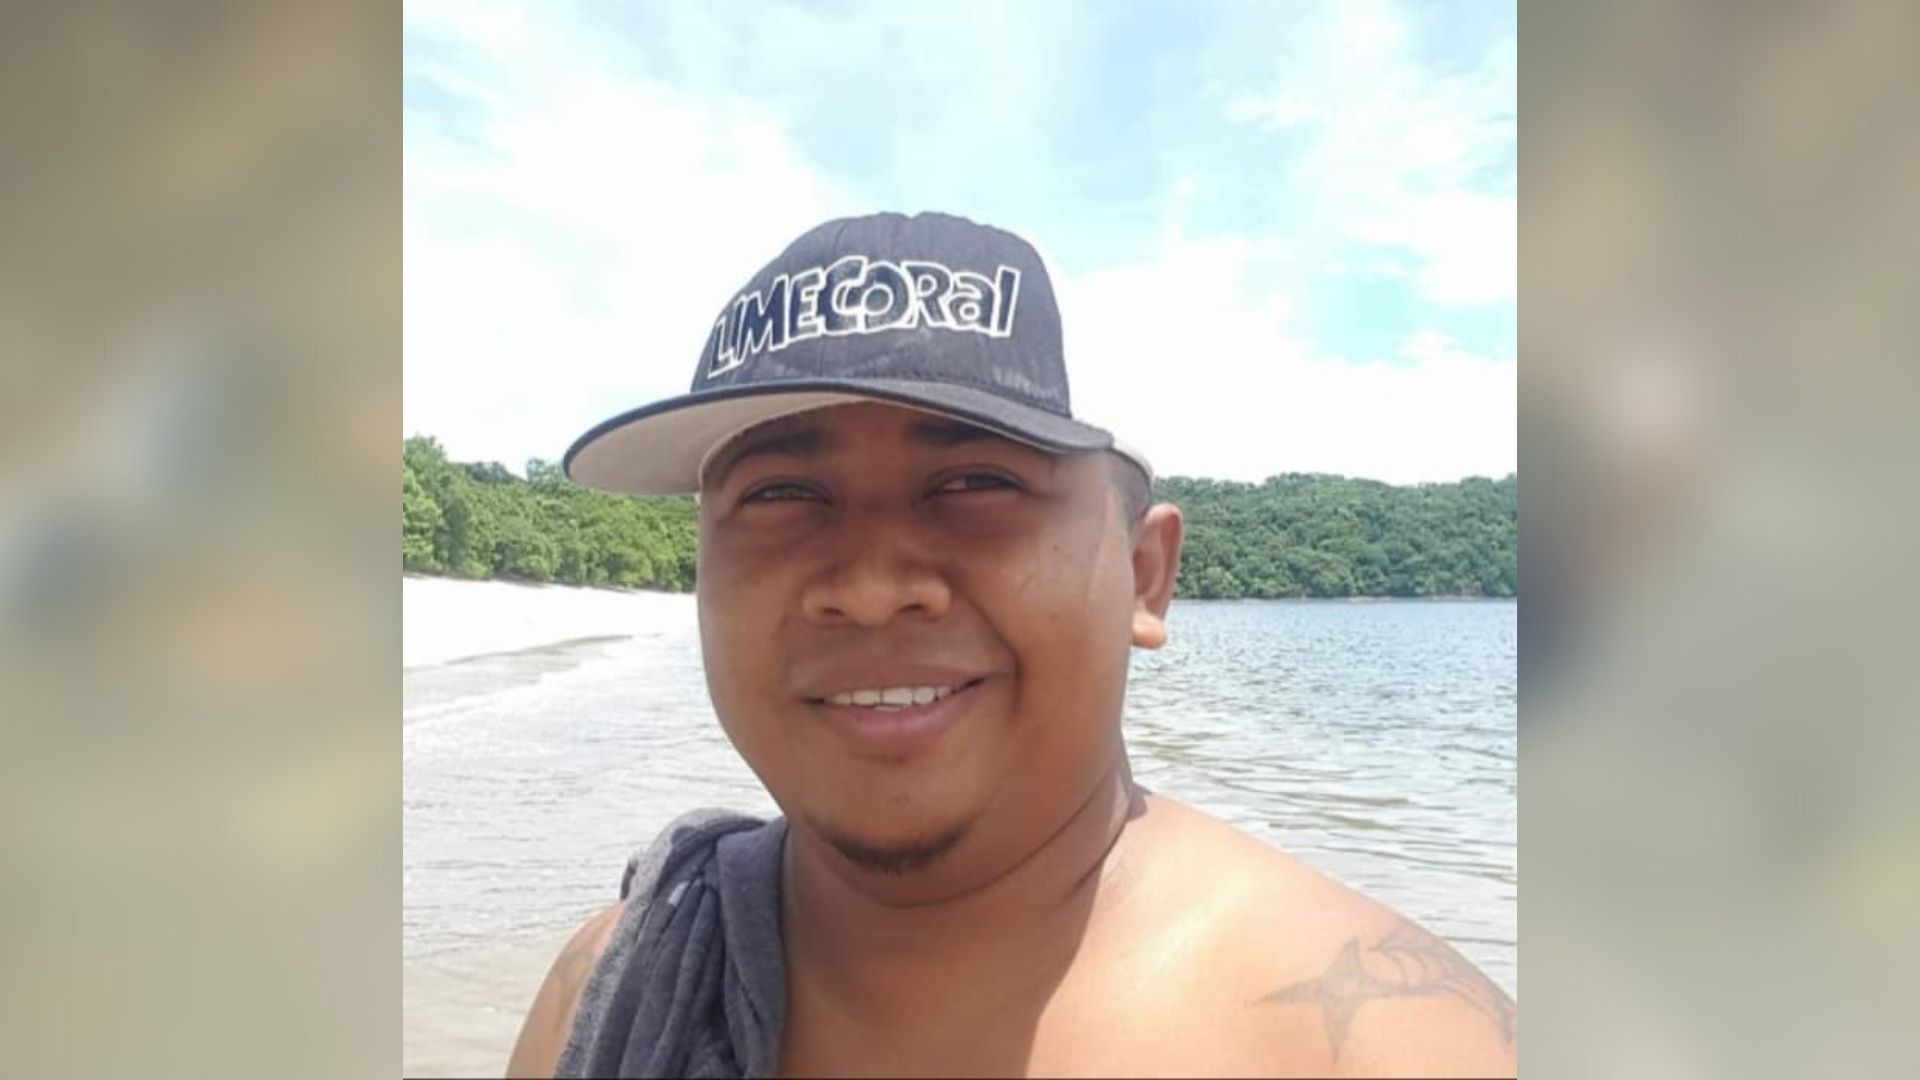 A unique migrant who worked as an "illegal taxi driver" is murdered in Costa Rica